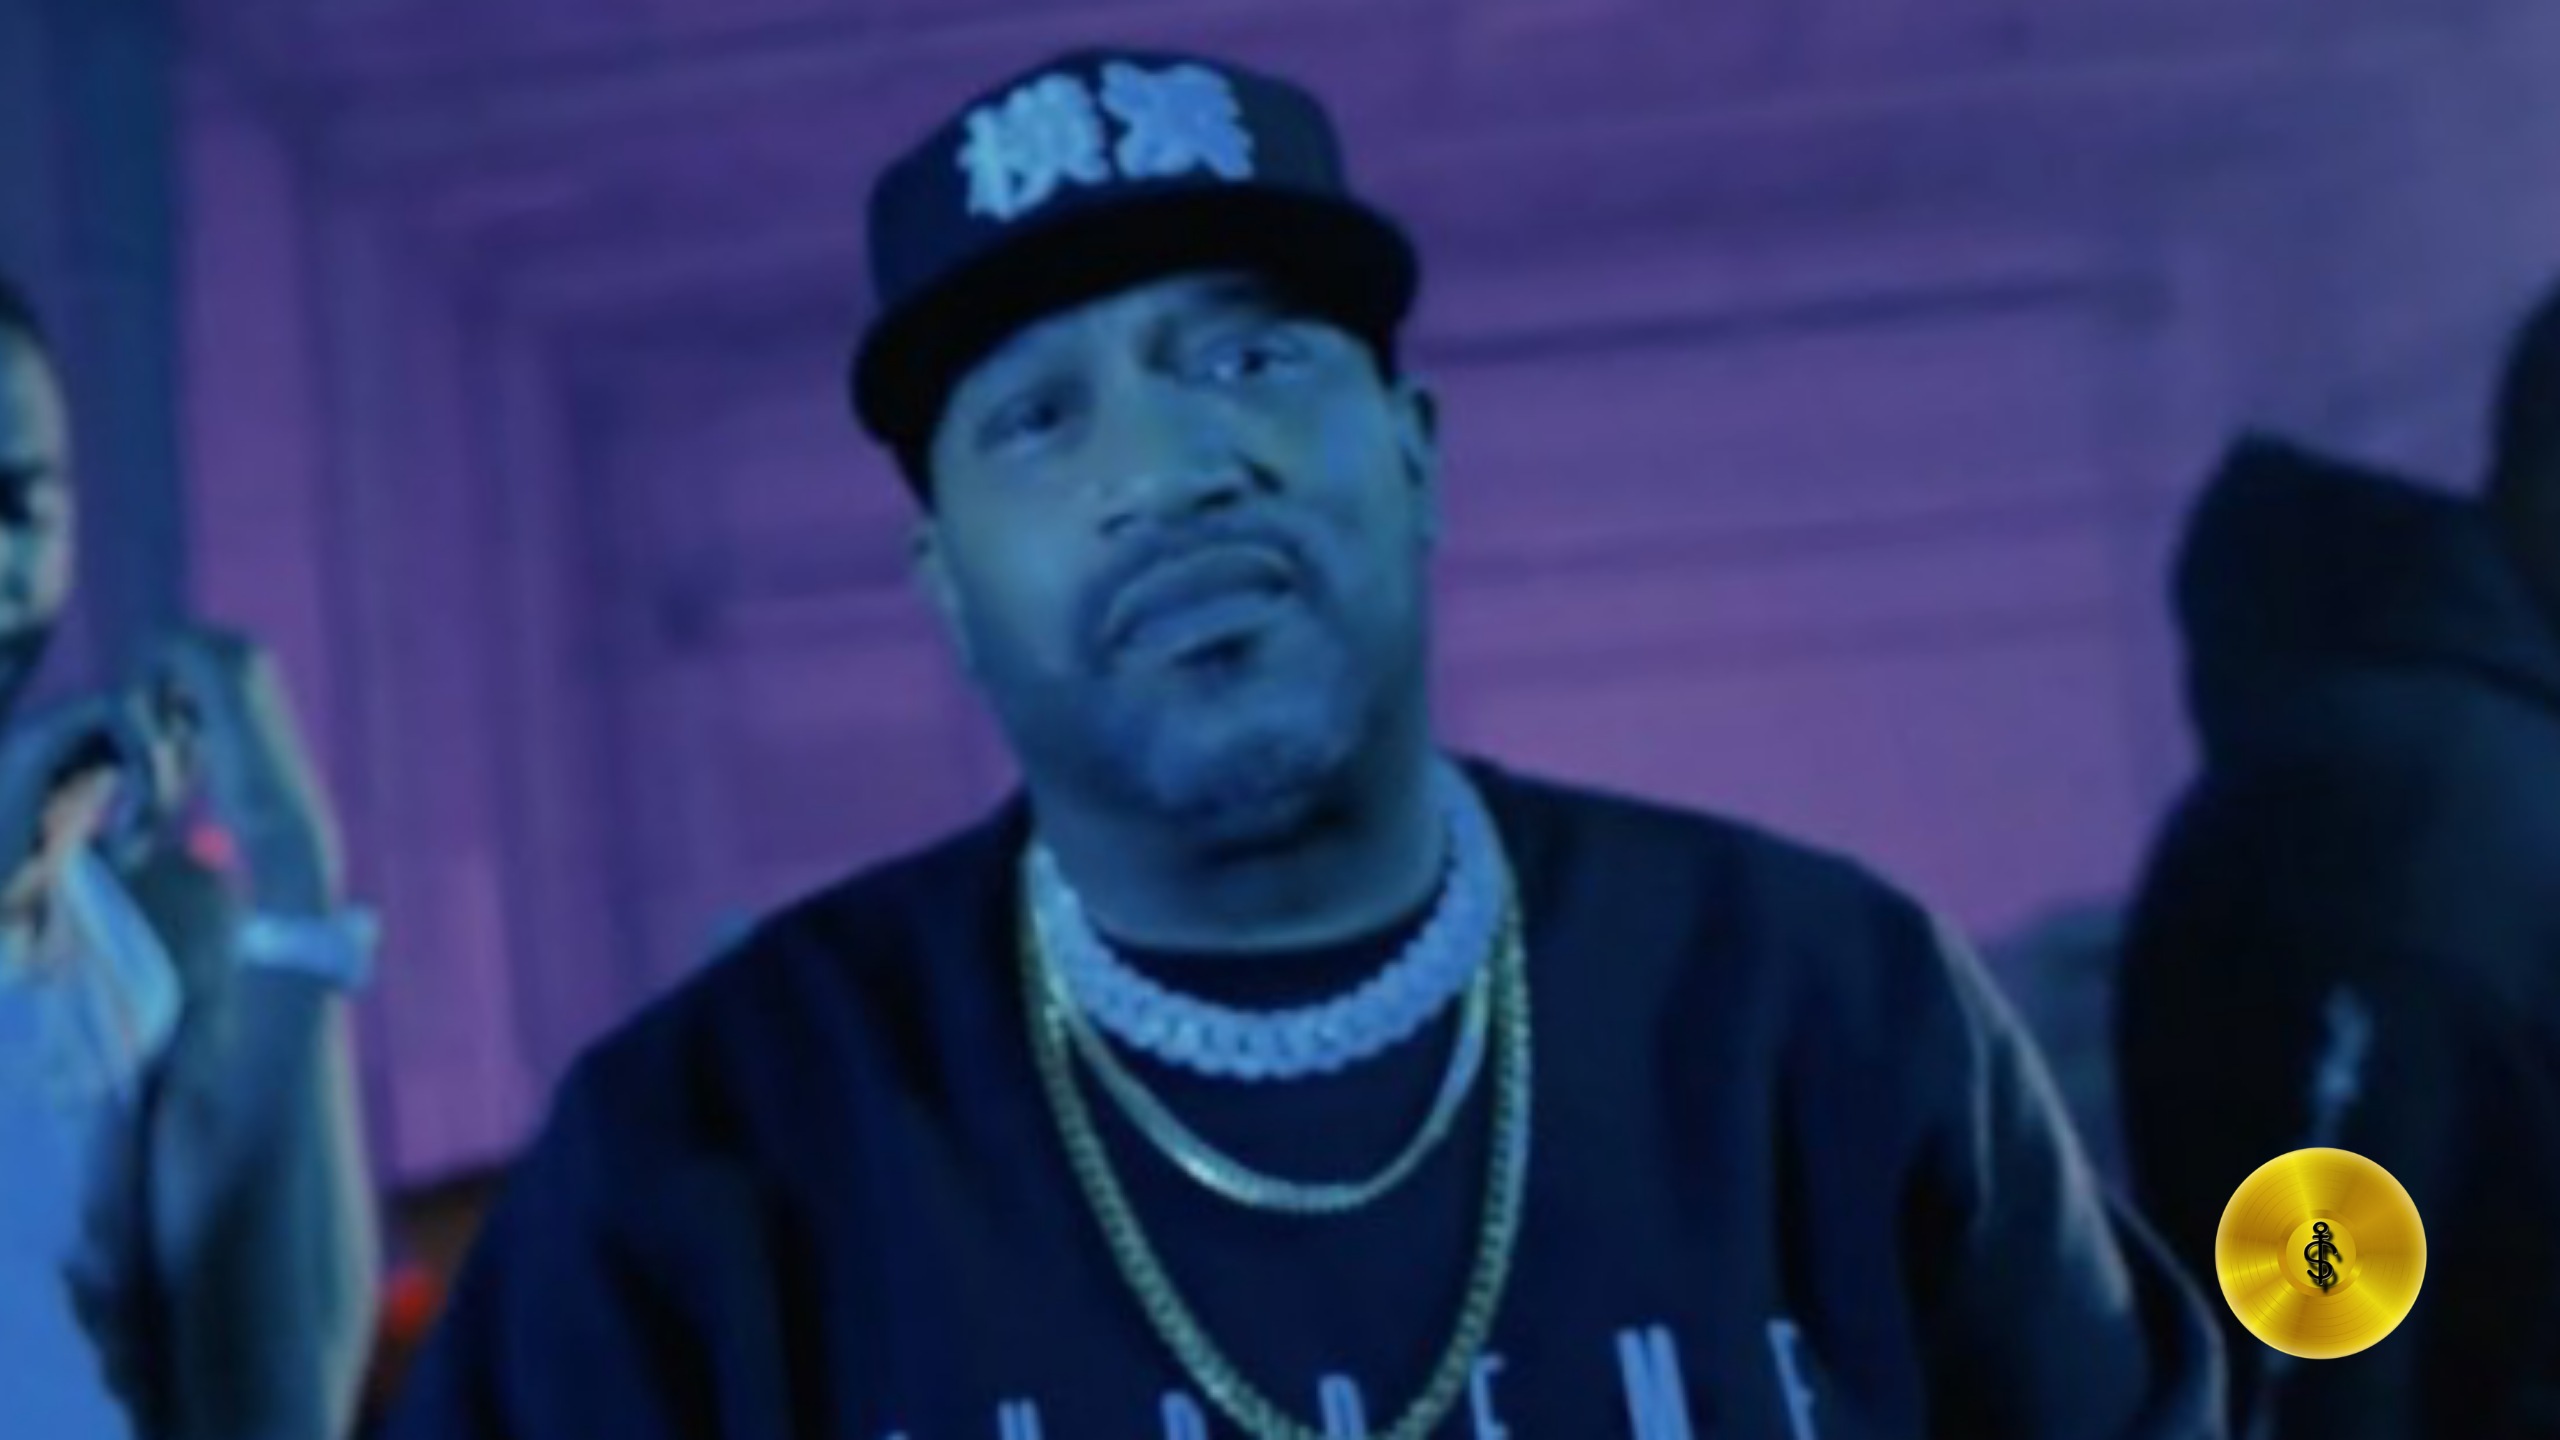 Bun B & LE$ To Release New EP, “Distant”